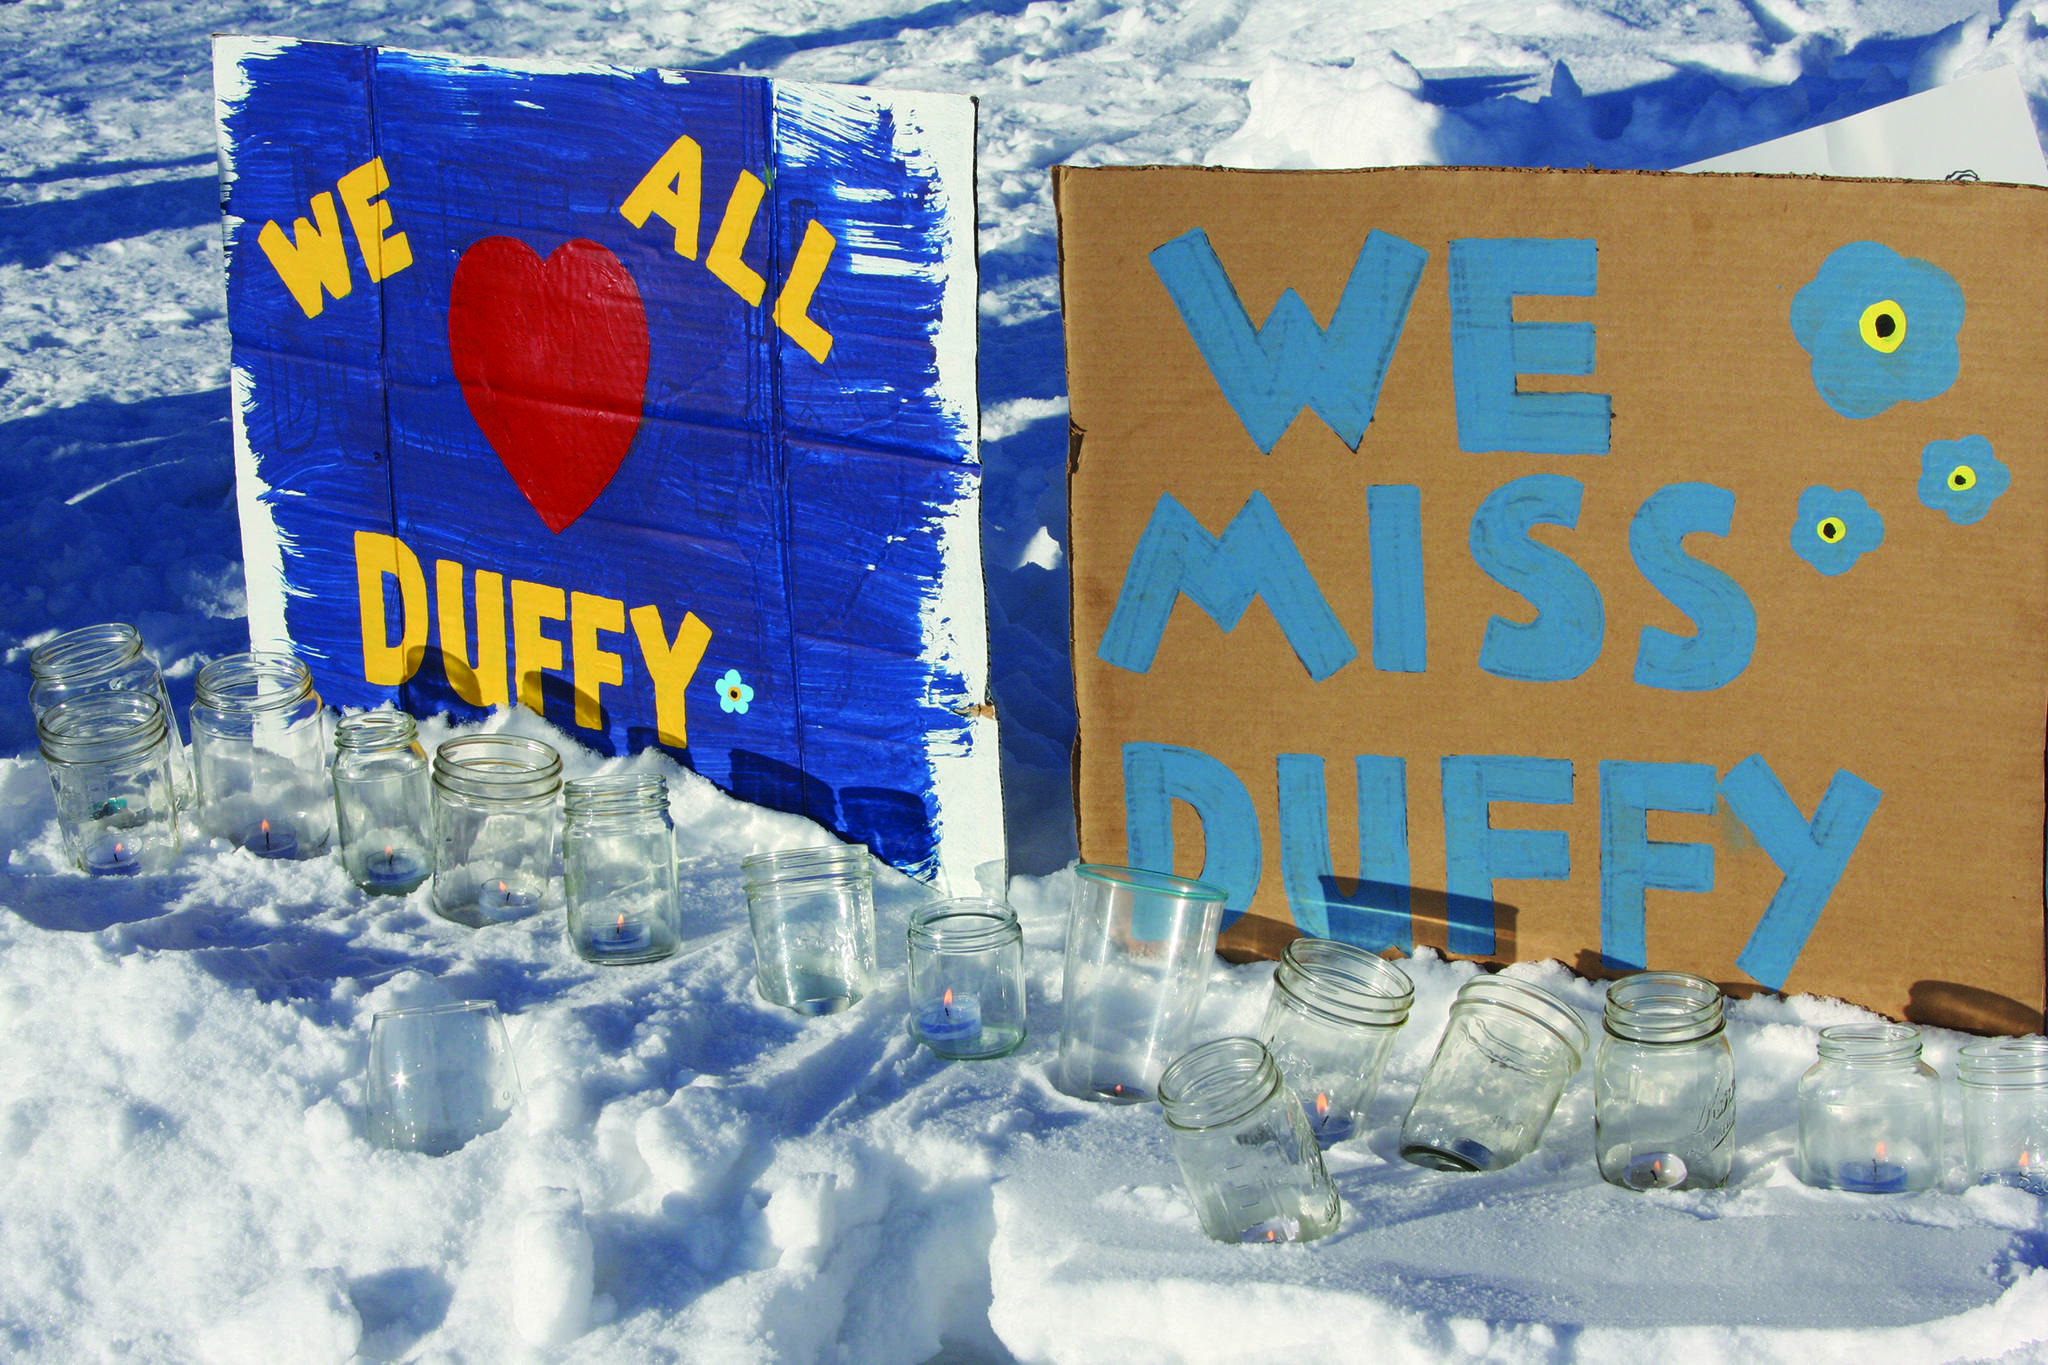 Painted signs posted at the candlelight vigil held for Anesha “Duffy” Murnane on Saturday, Feb. 1, 2020, at WKFL Park in Homer, Alaska, affirm love for Murnane and beseech her safe return. (Photo by Delcenia Cosman)